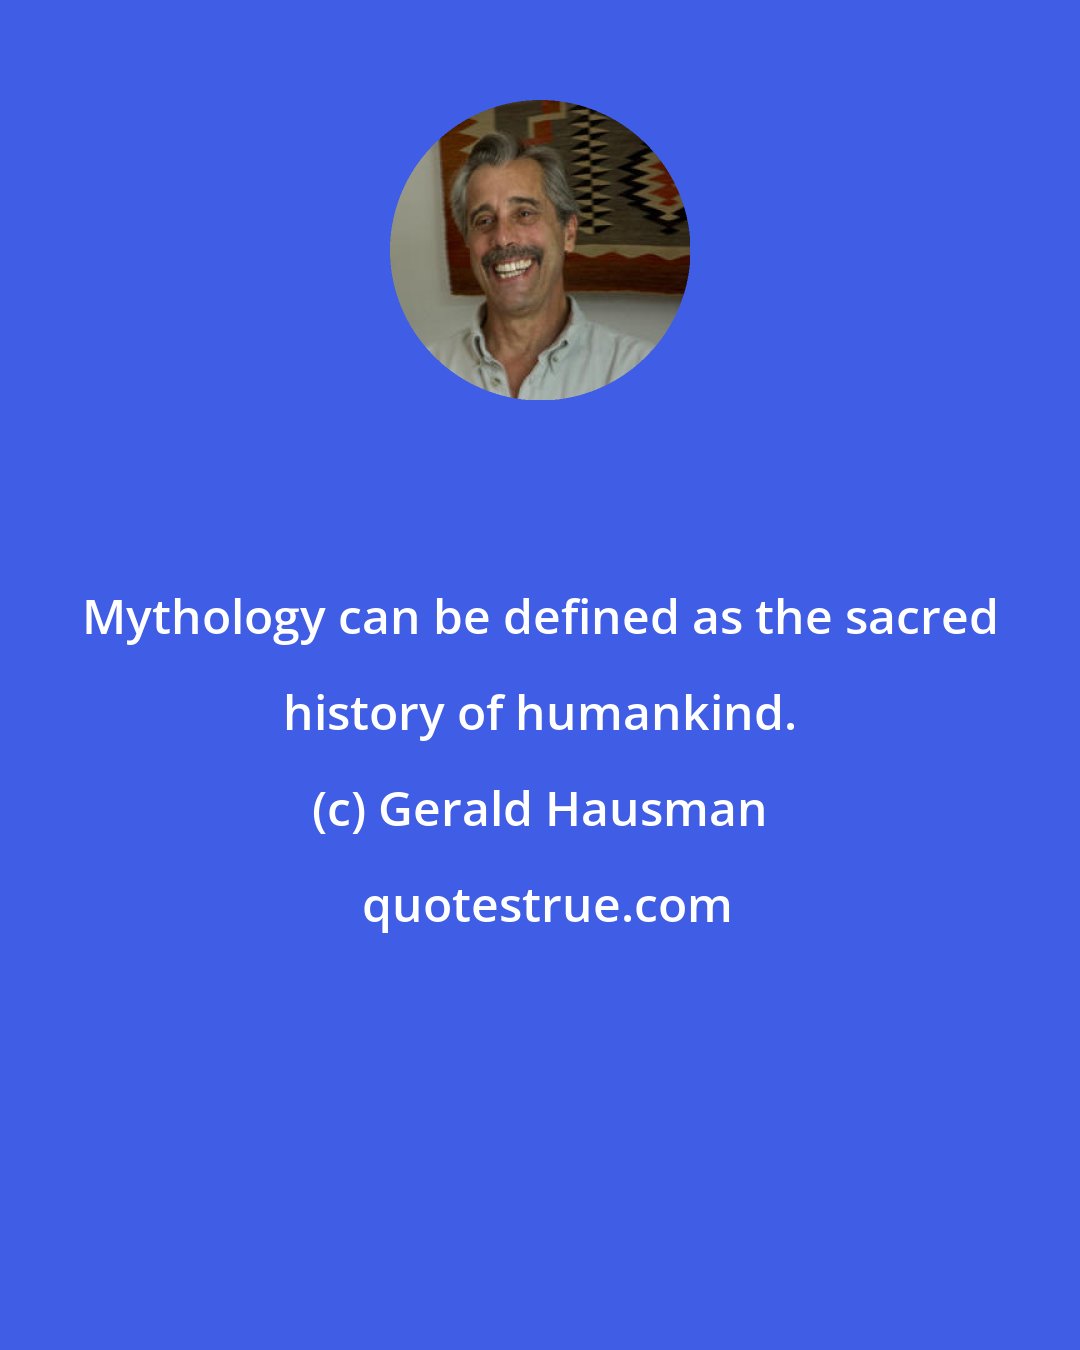 Gerald Hausman: Mythology can be defined as the sacred history of humankind.